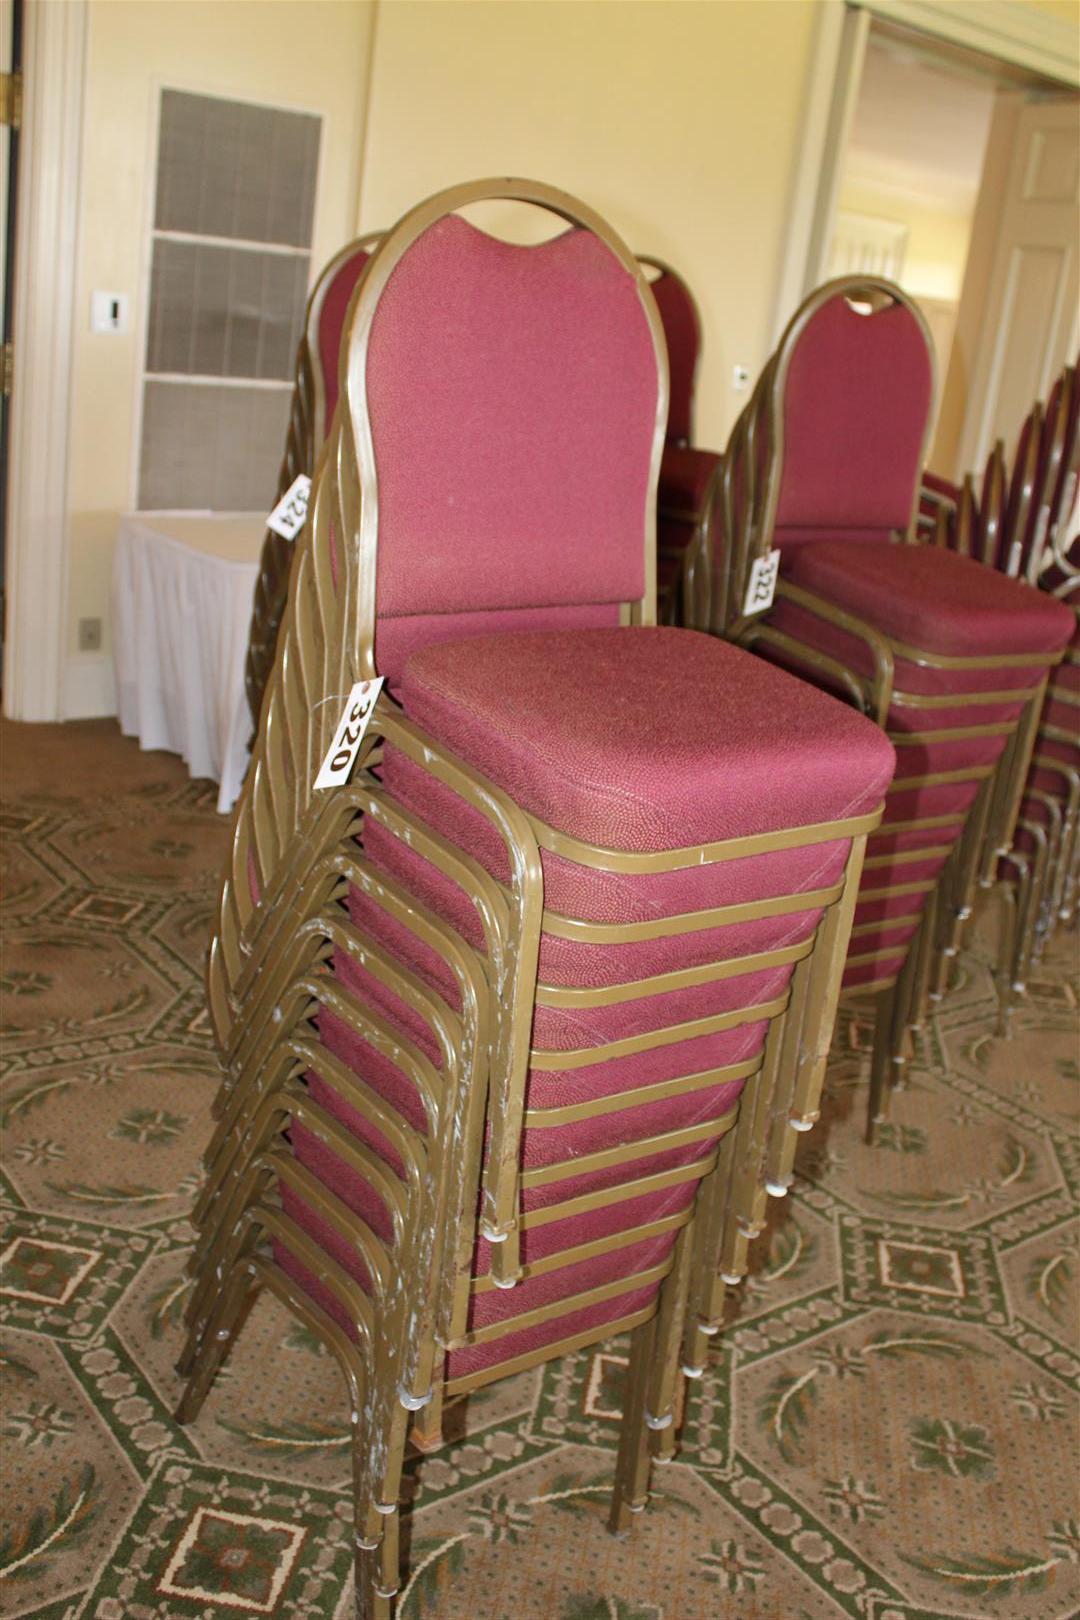 (10) BANQUET CHAIRS